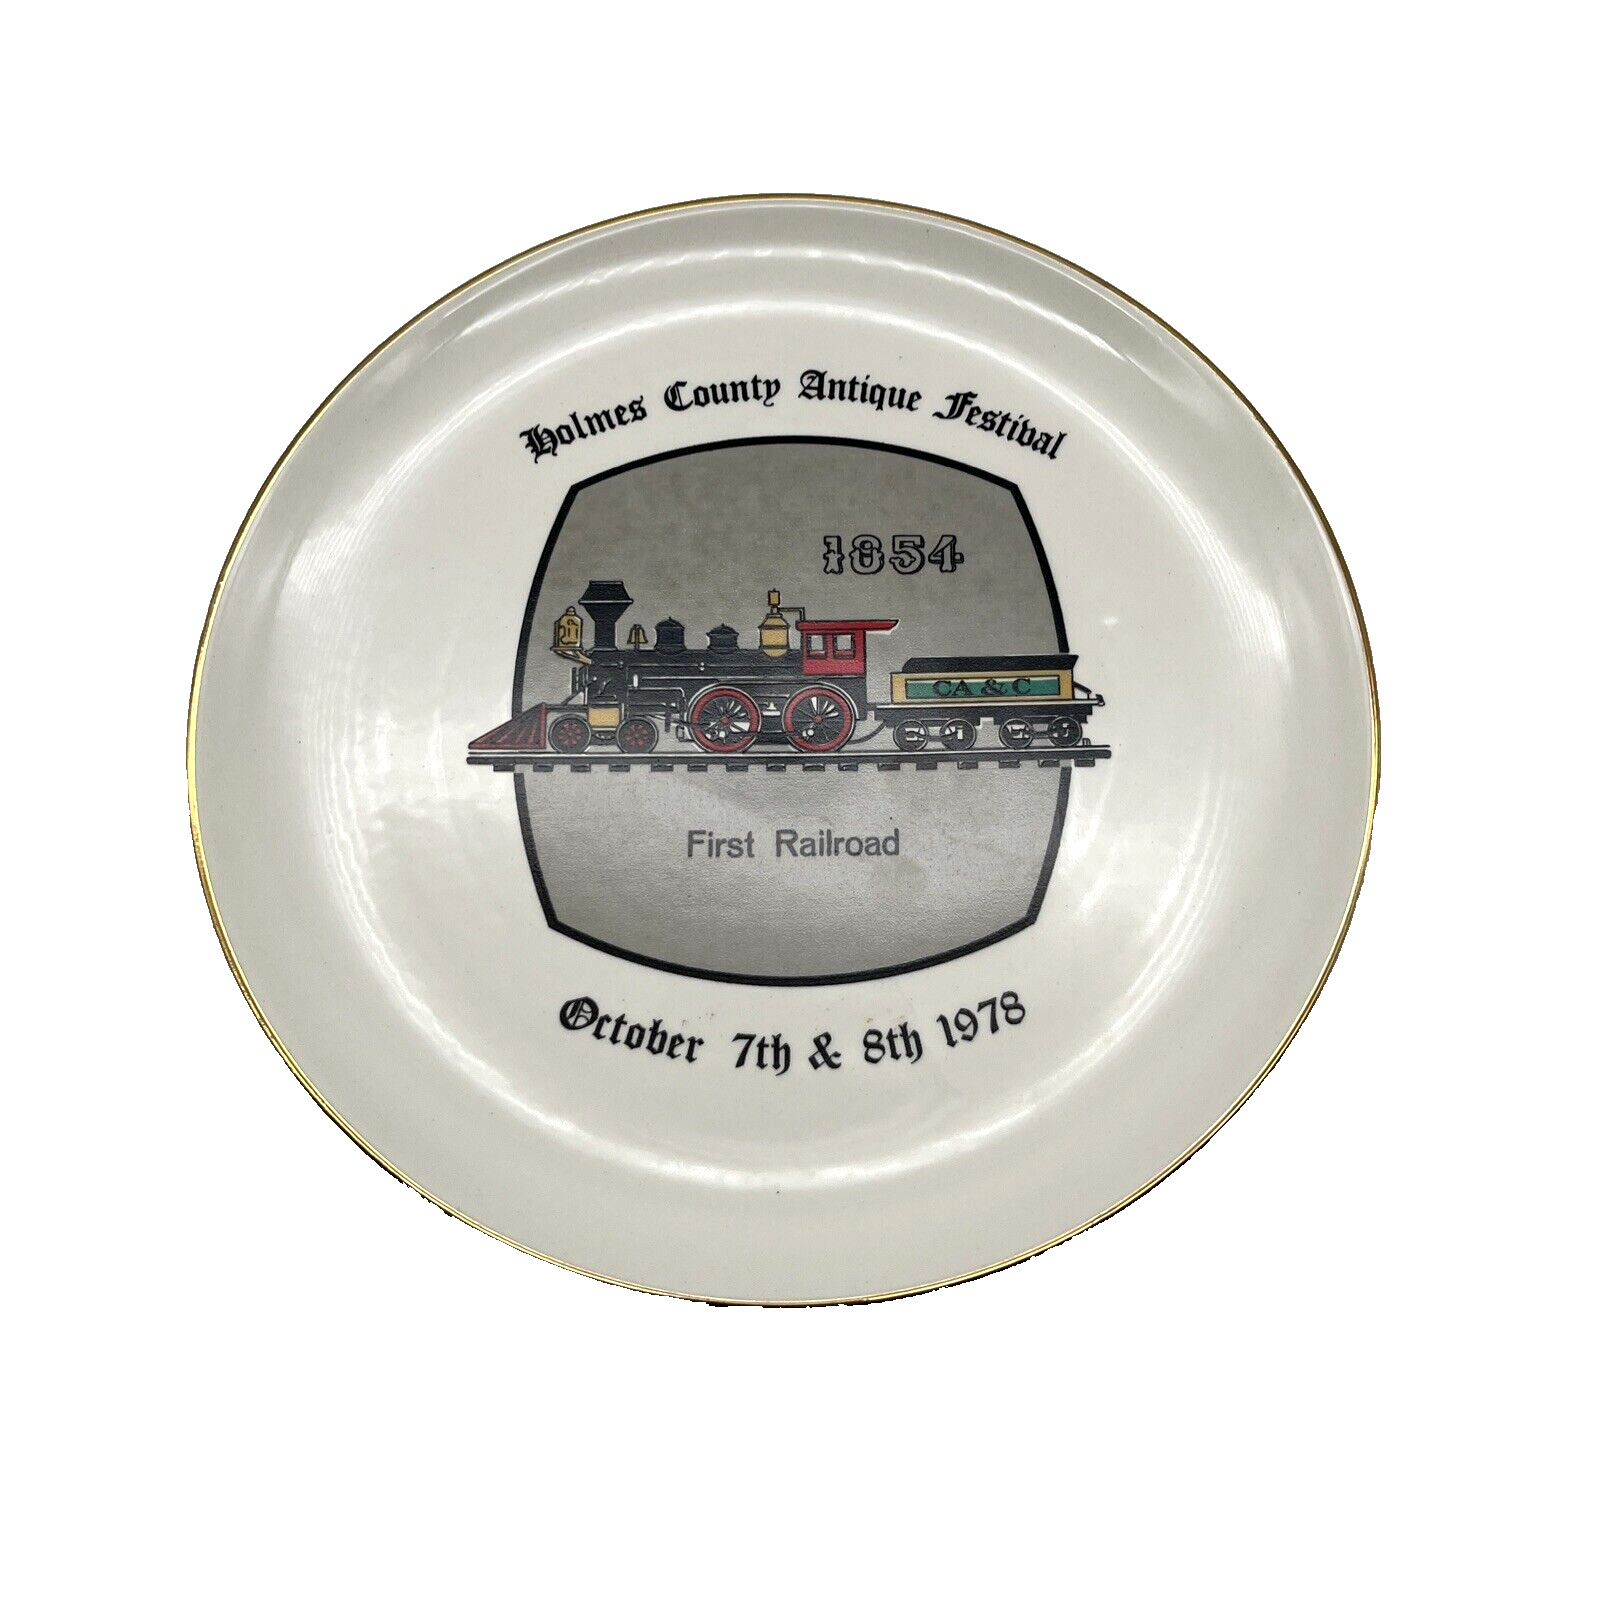 1978 Homes County Antique Festival Collectible Plate 1854 First Railroad/Trains